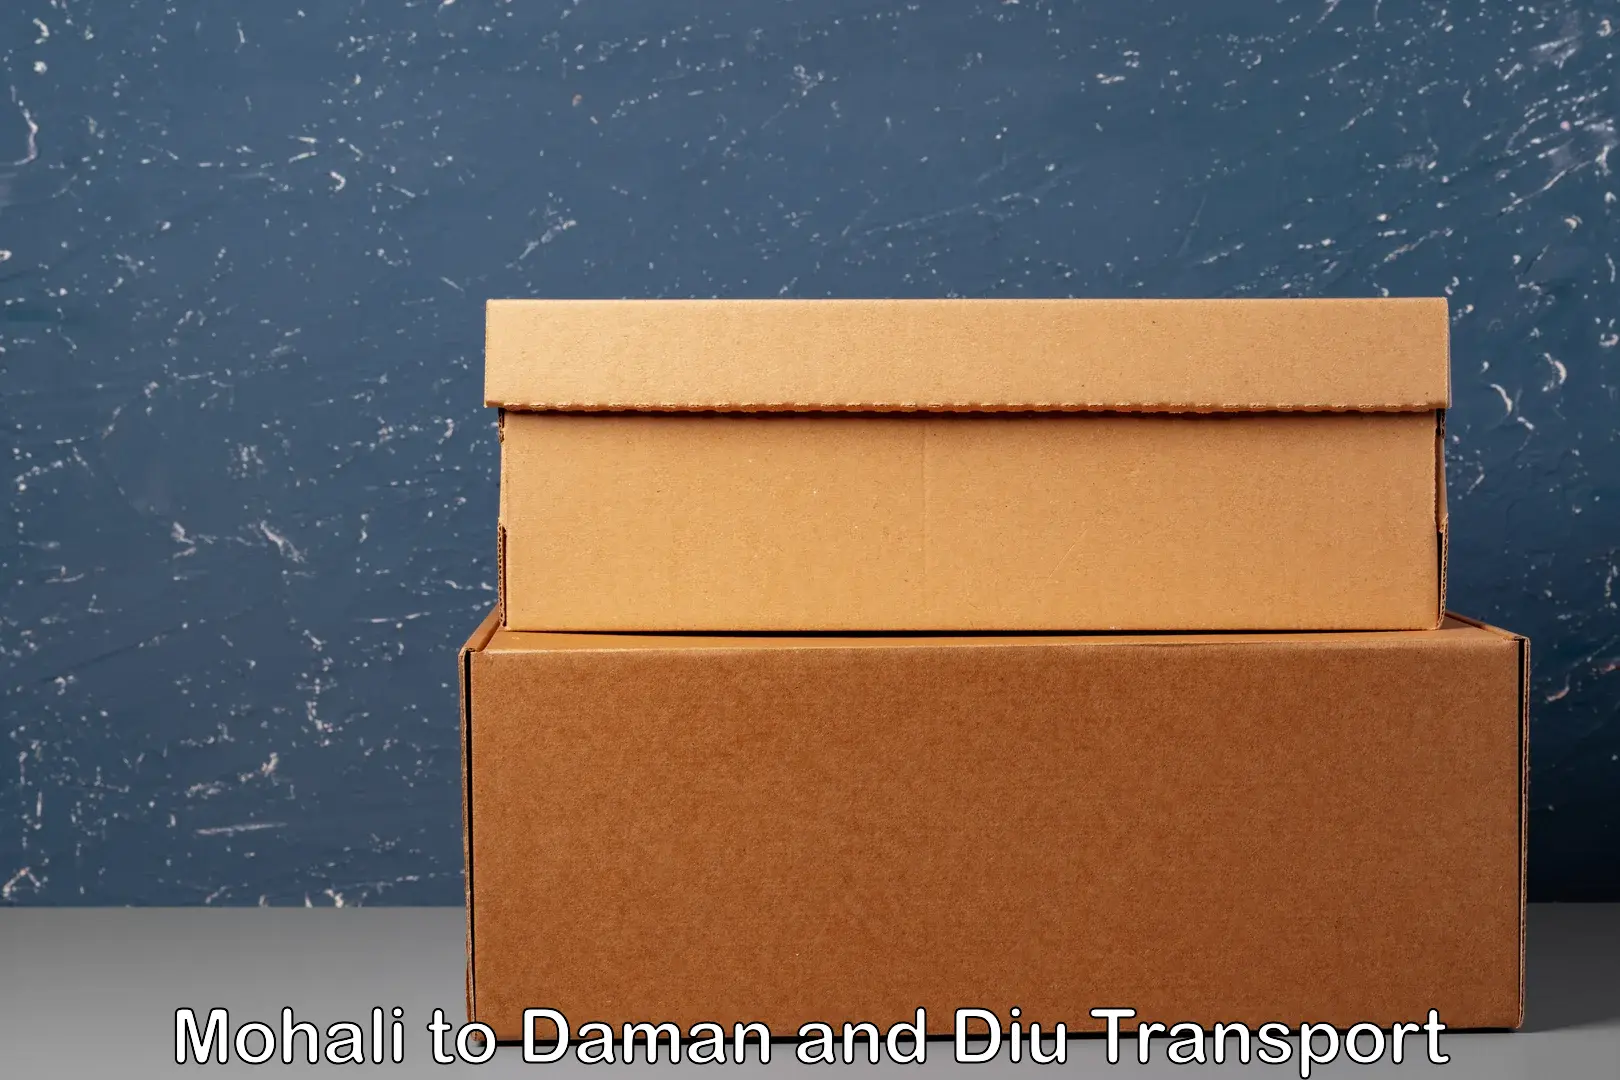 Nationwide transport services Mohali to Daman and Diu